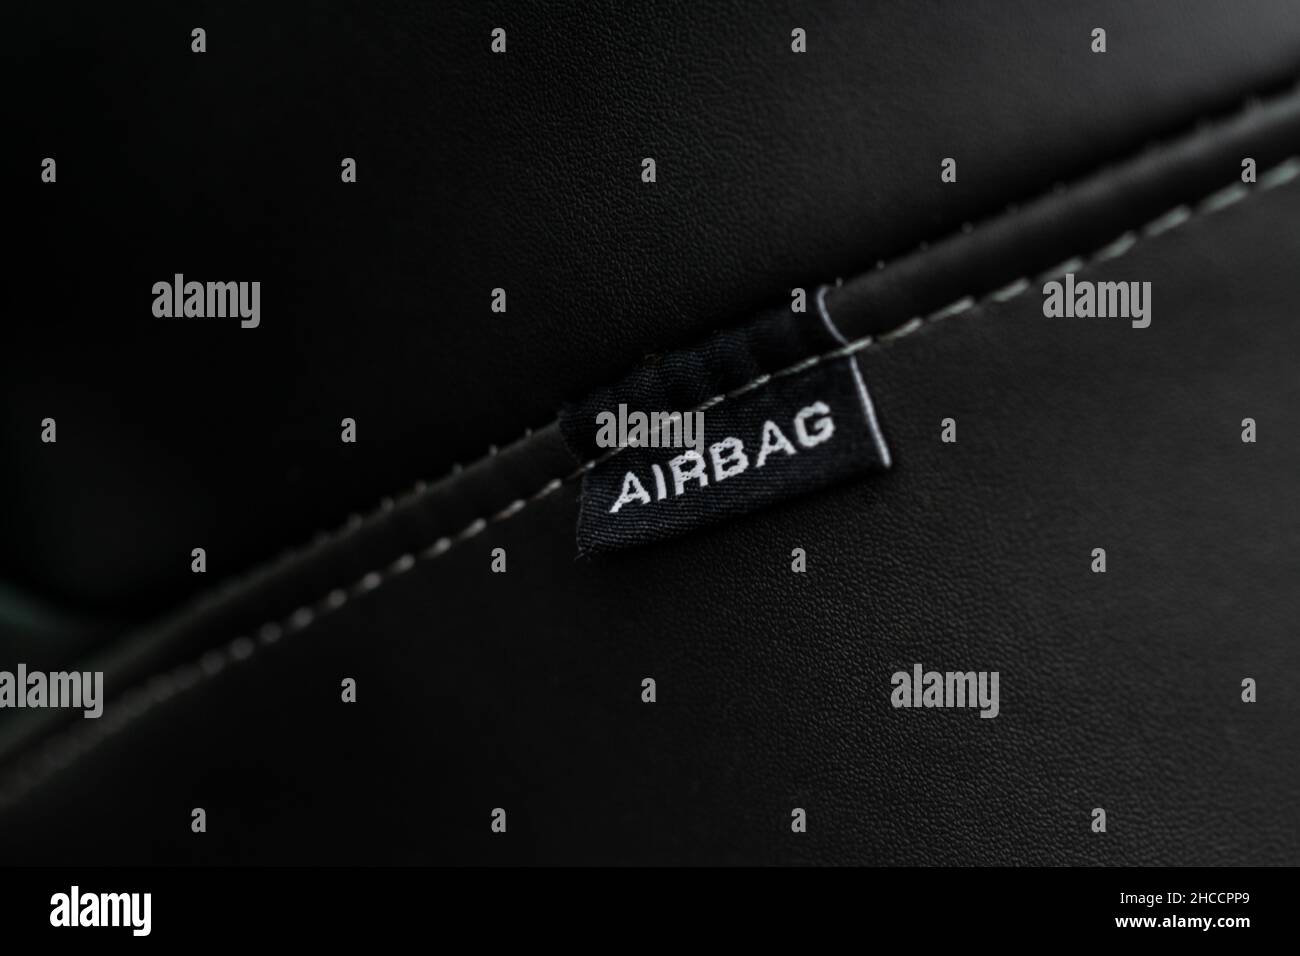 Close up view of airbag label on the side of a car seat. Airbag safety system symbol on the car seat. Modern car interior details. Stock Photo